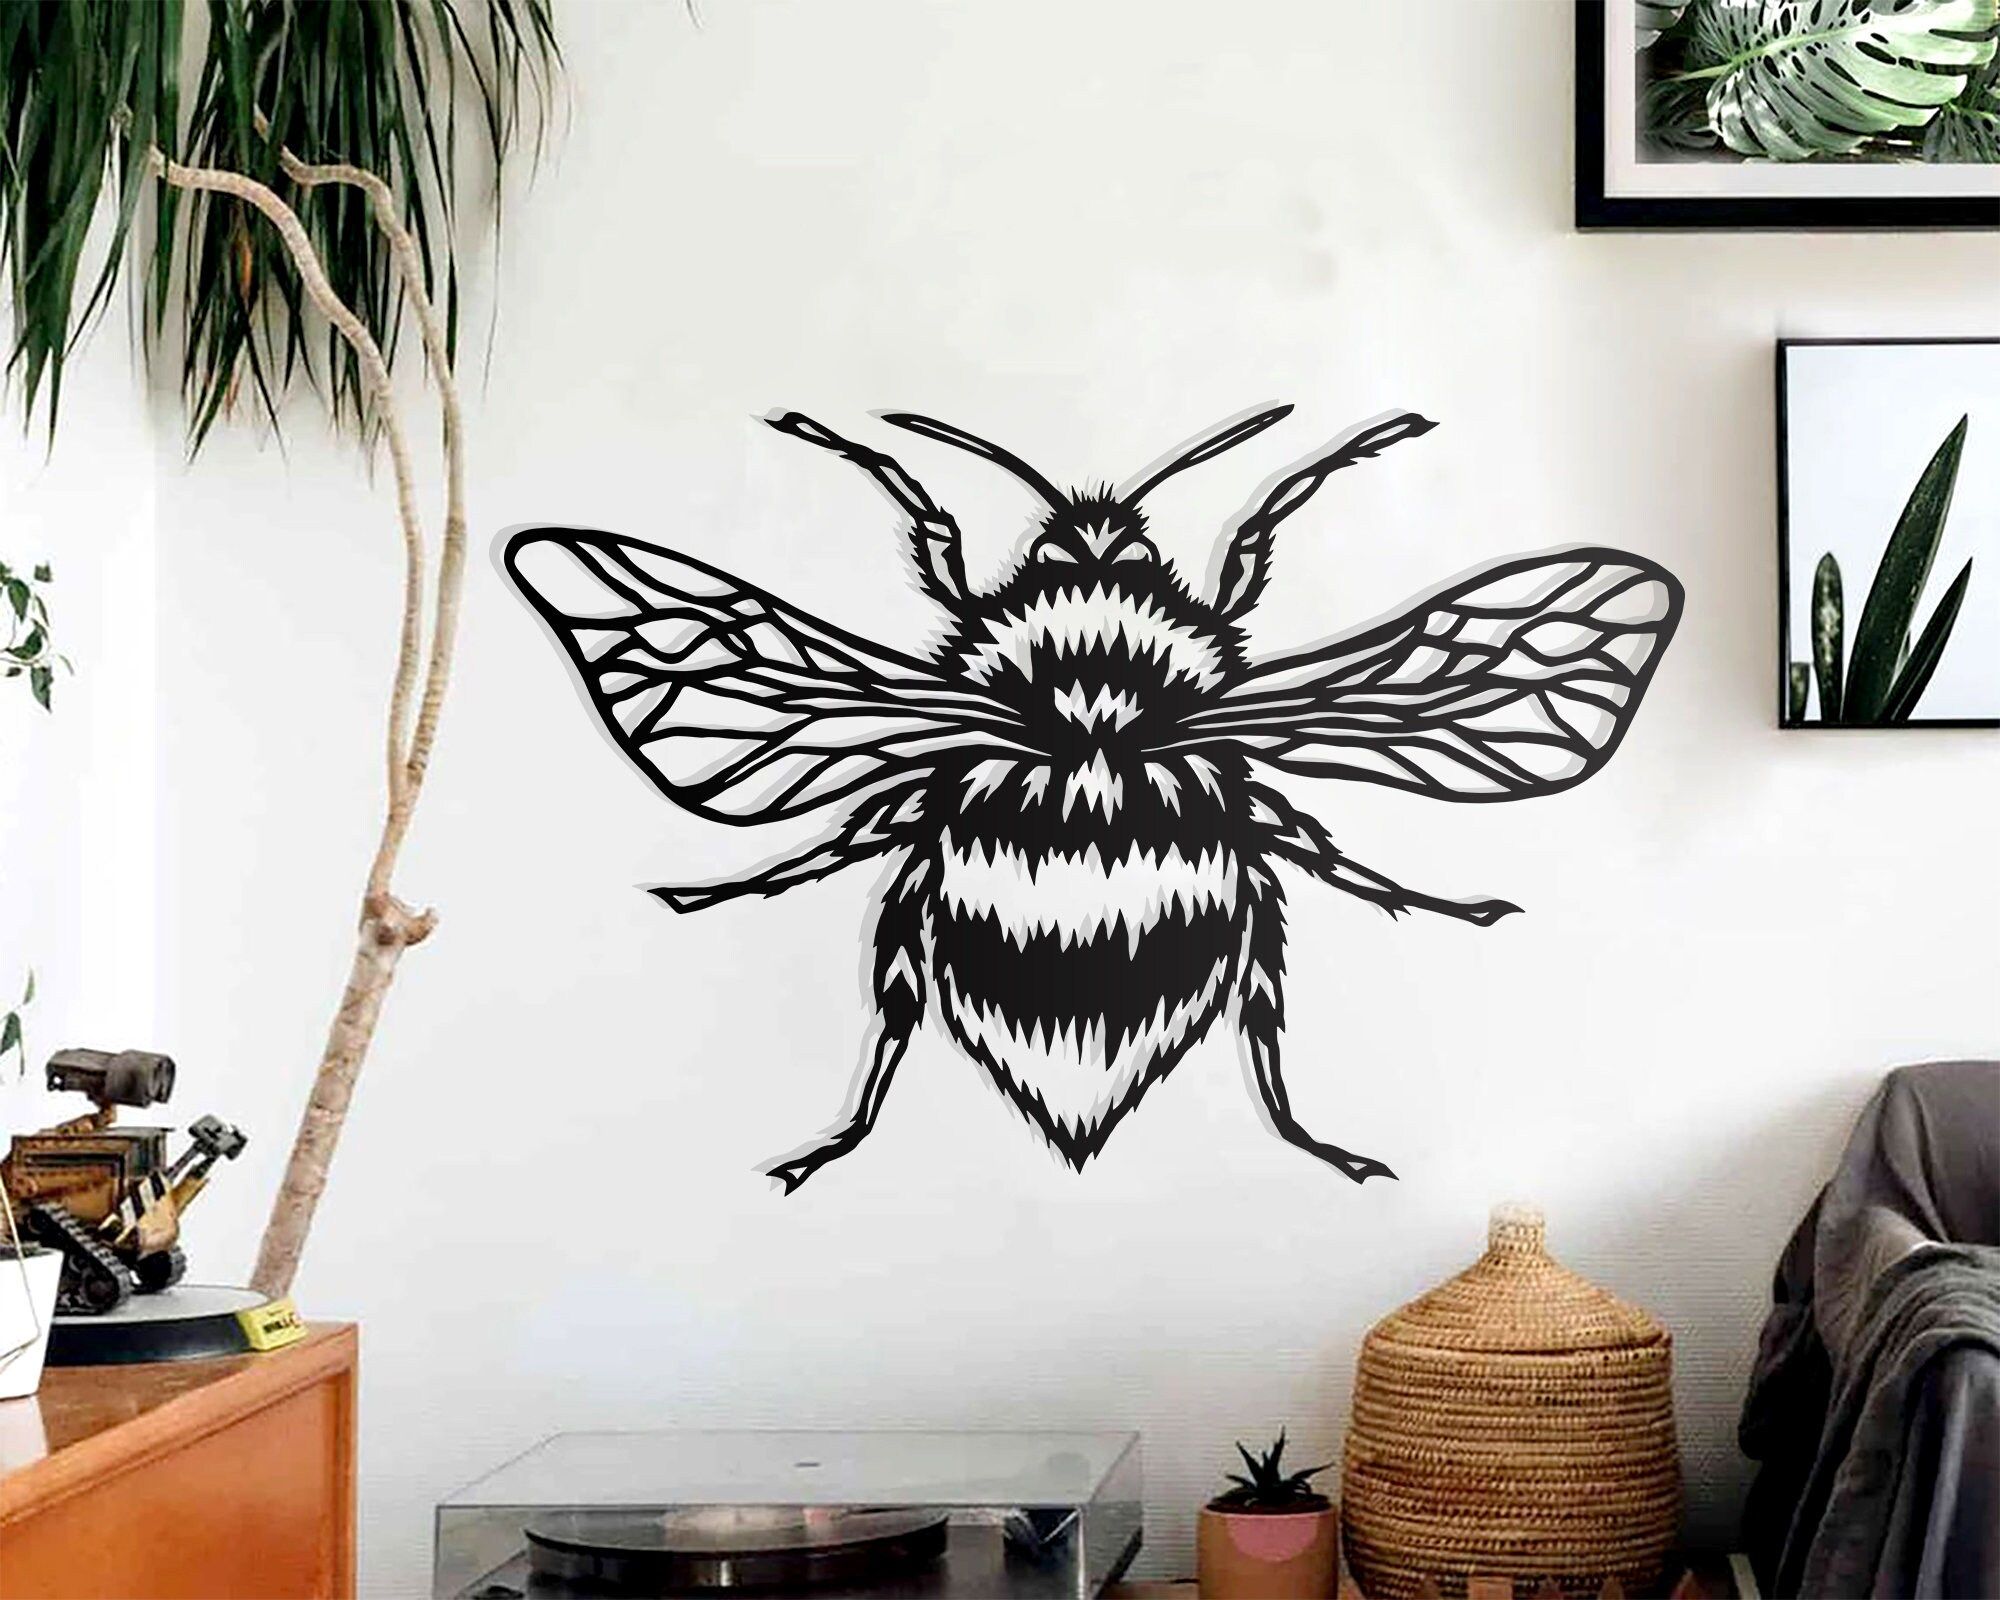 Bumble Bee Metal Wall Art Wall Decoration Living Room – Etsy Within Best And Newest Metal Wall Bumble Bee Wall Art (View 2 of 20)